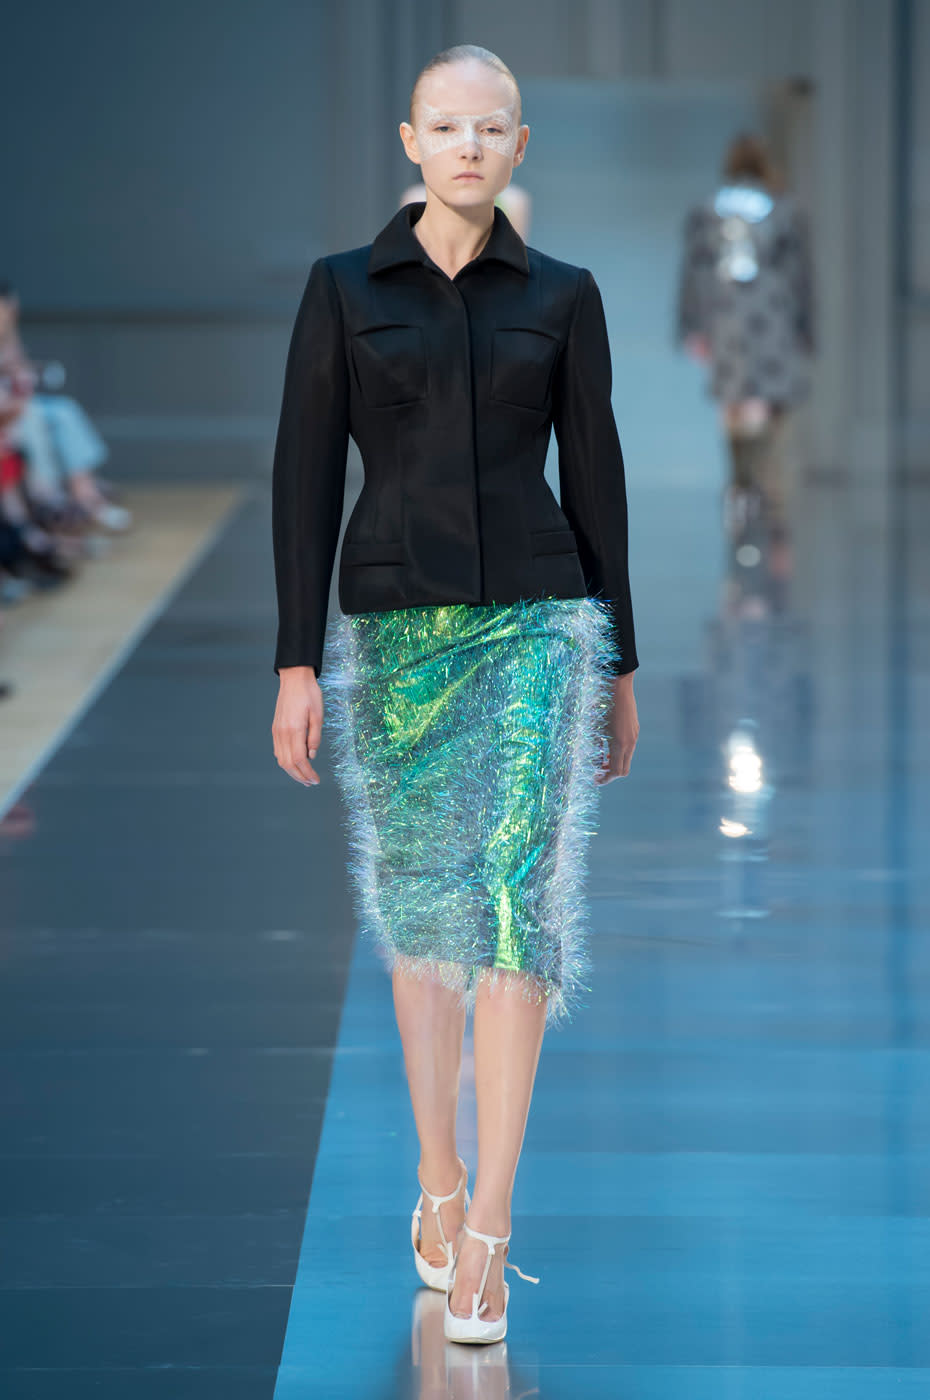 Among his many varied looks, Galliano showed this plastic tinsel skirt that was truly out of this world. He paired it with an architectural blazer that brought the look back down to earth.